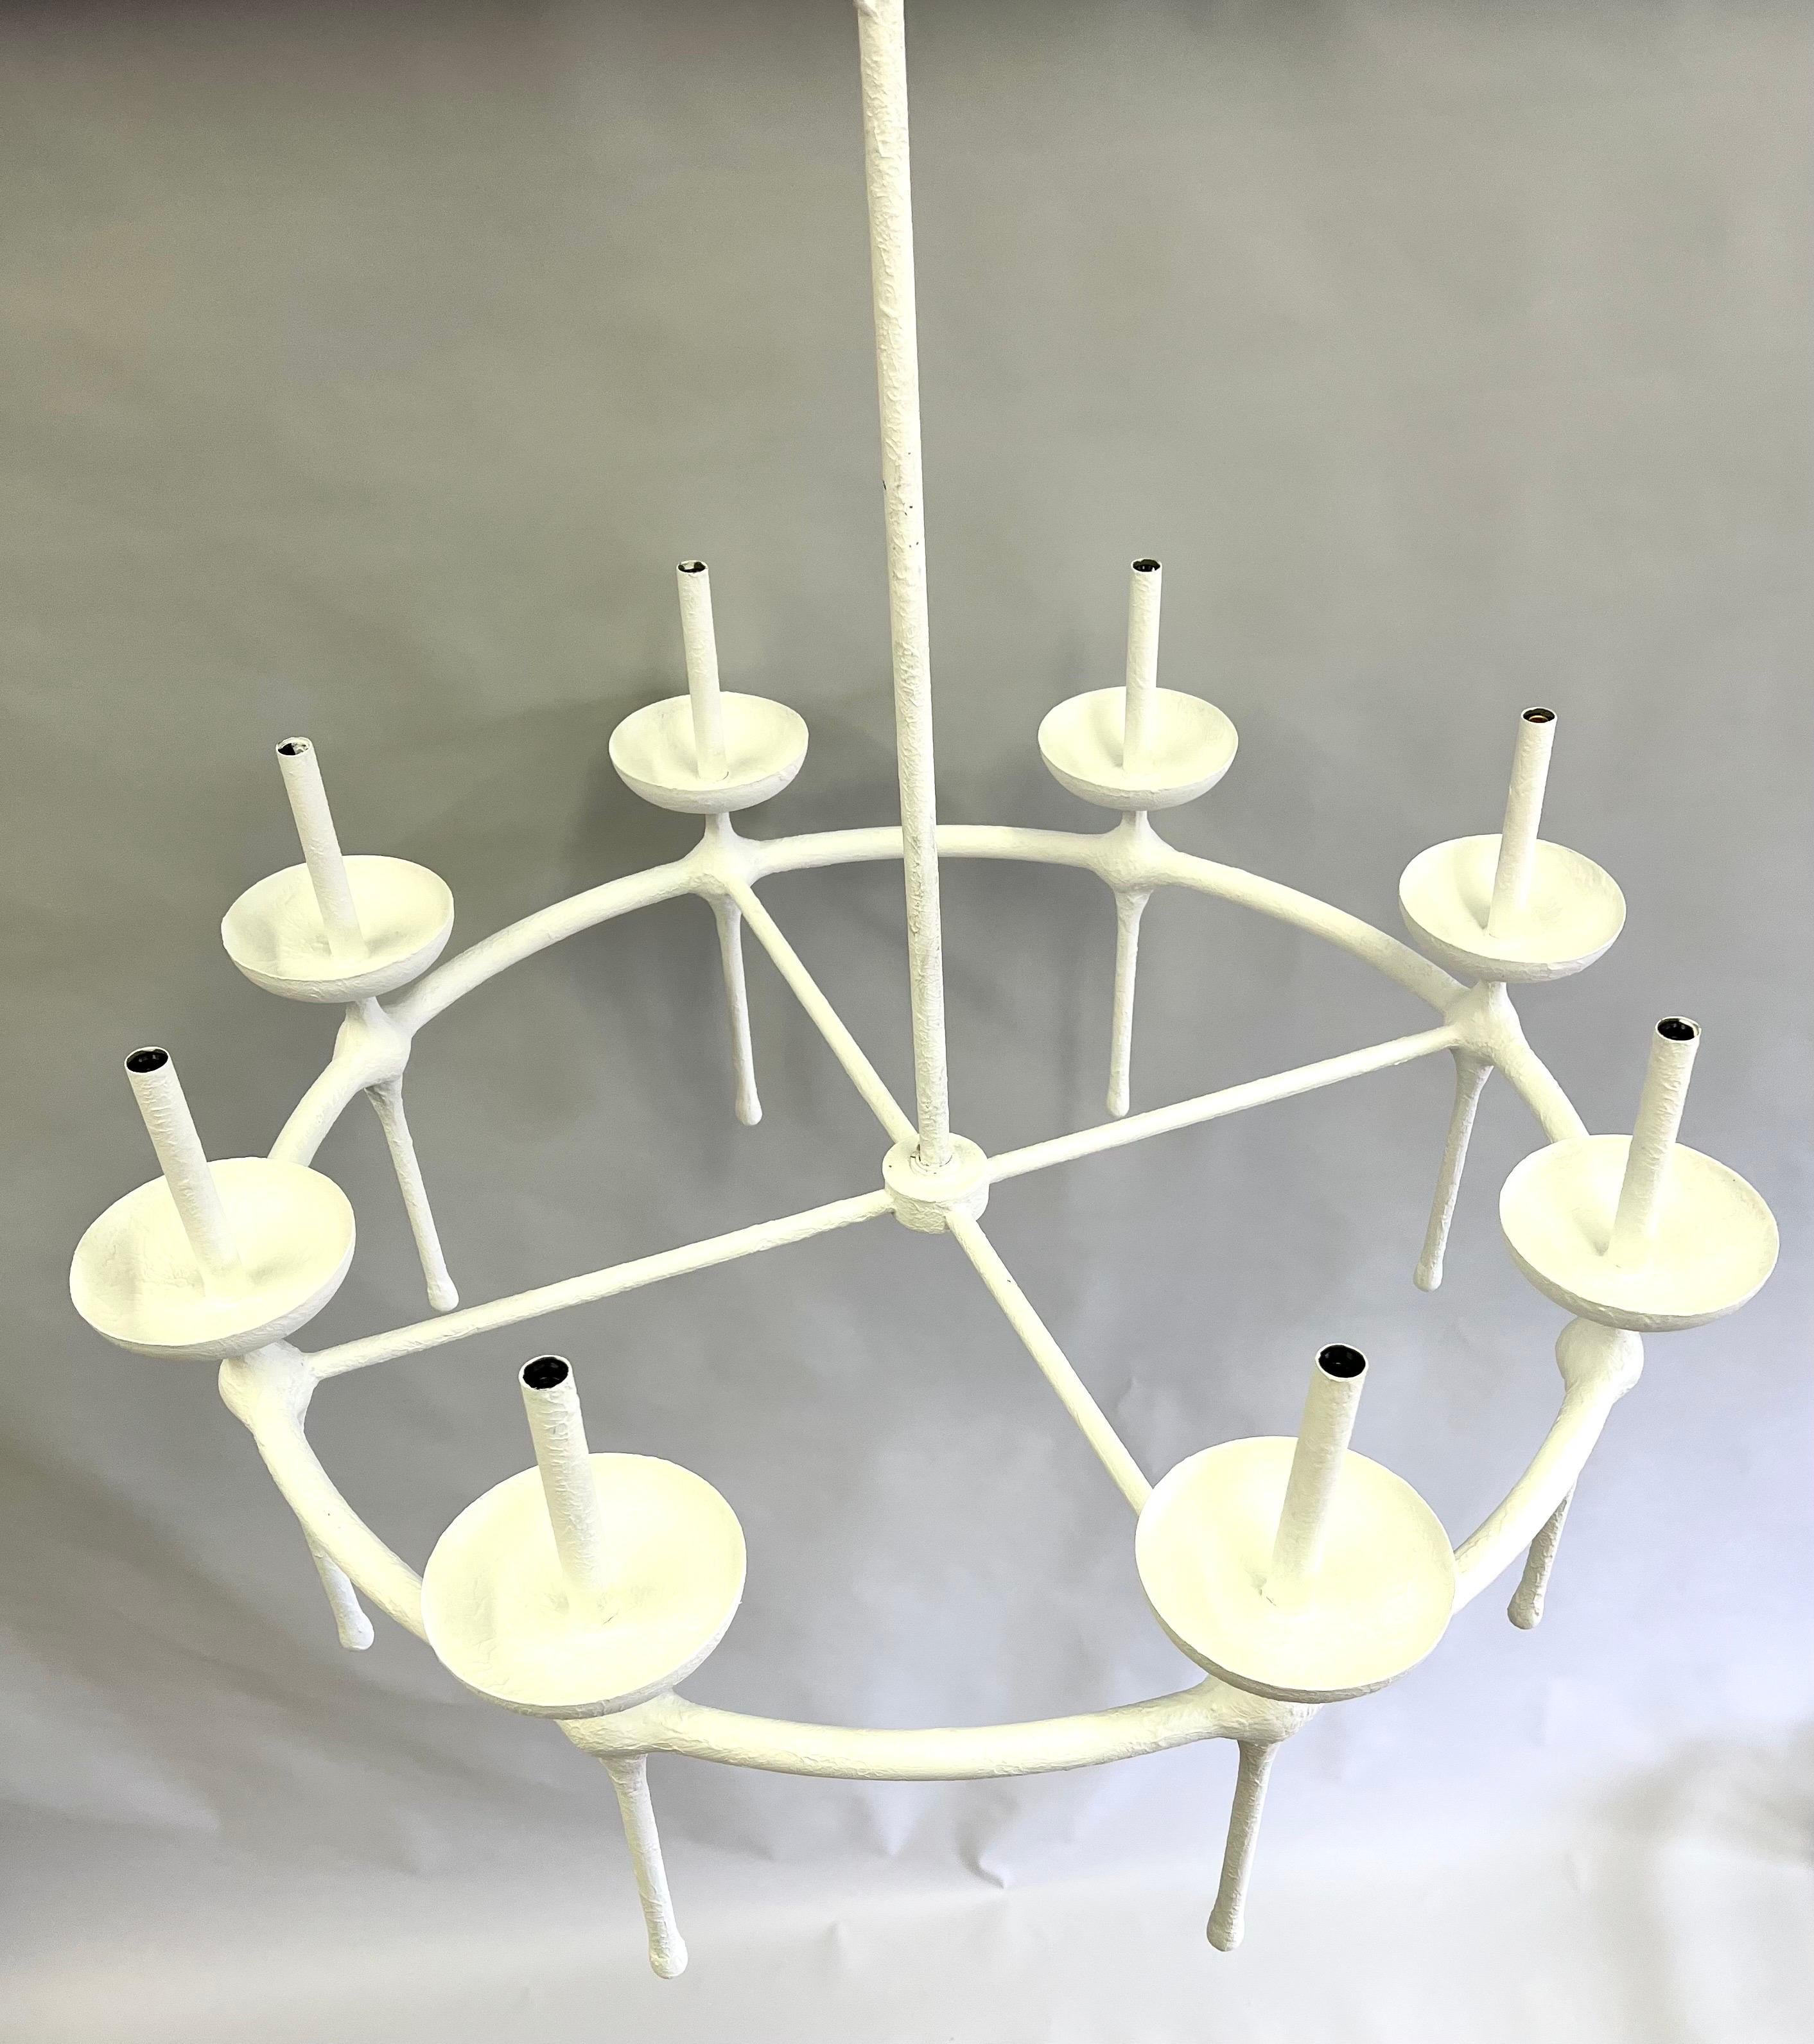 French, Modern Neoclassical Plaster Chandelier in the Style of Diego Giacometti For Sale 1